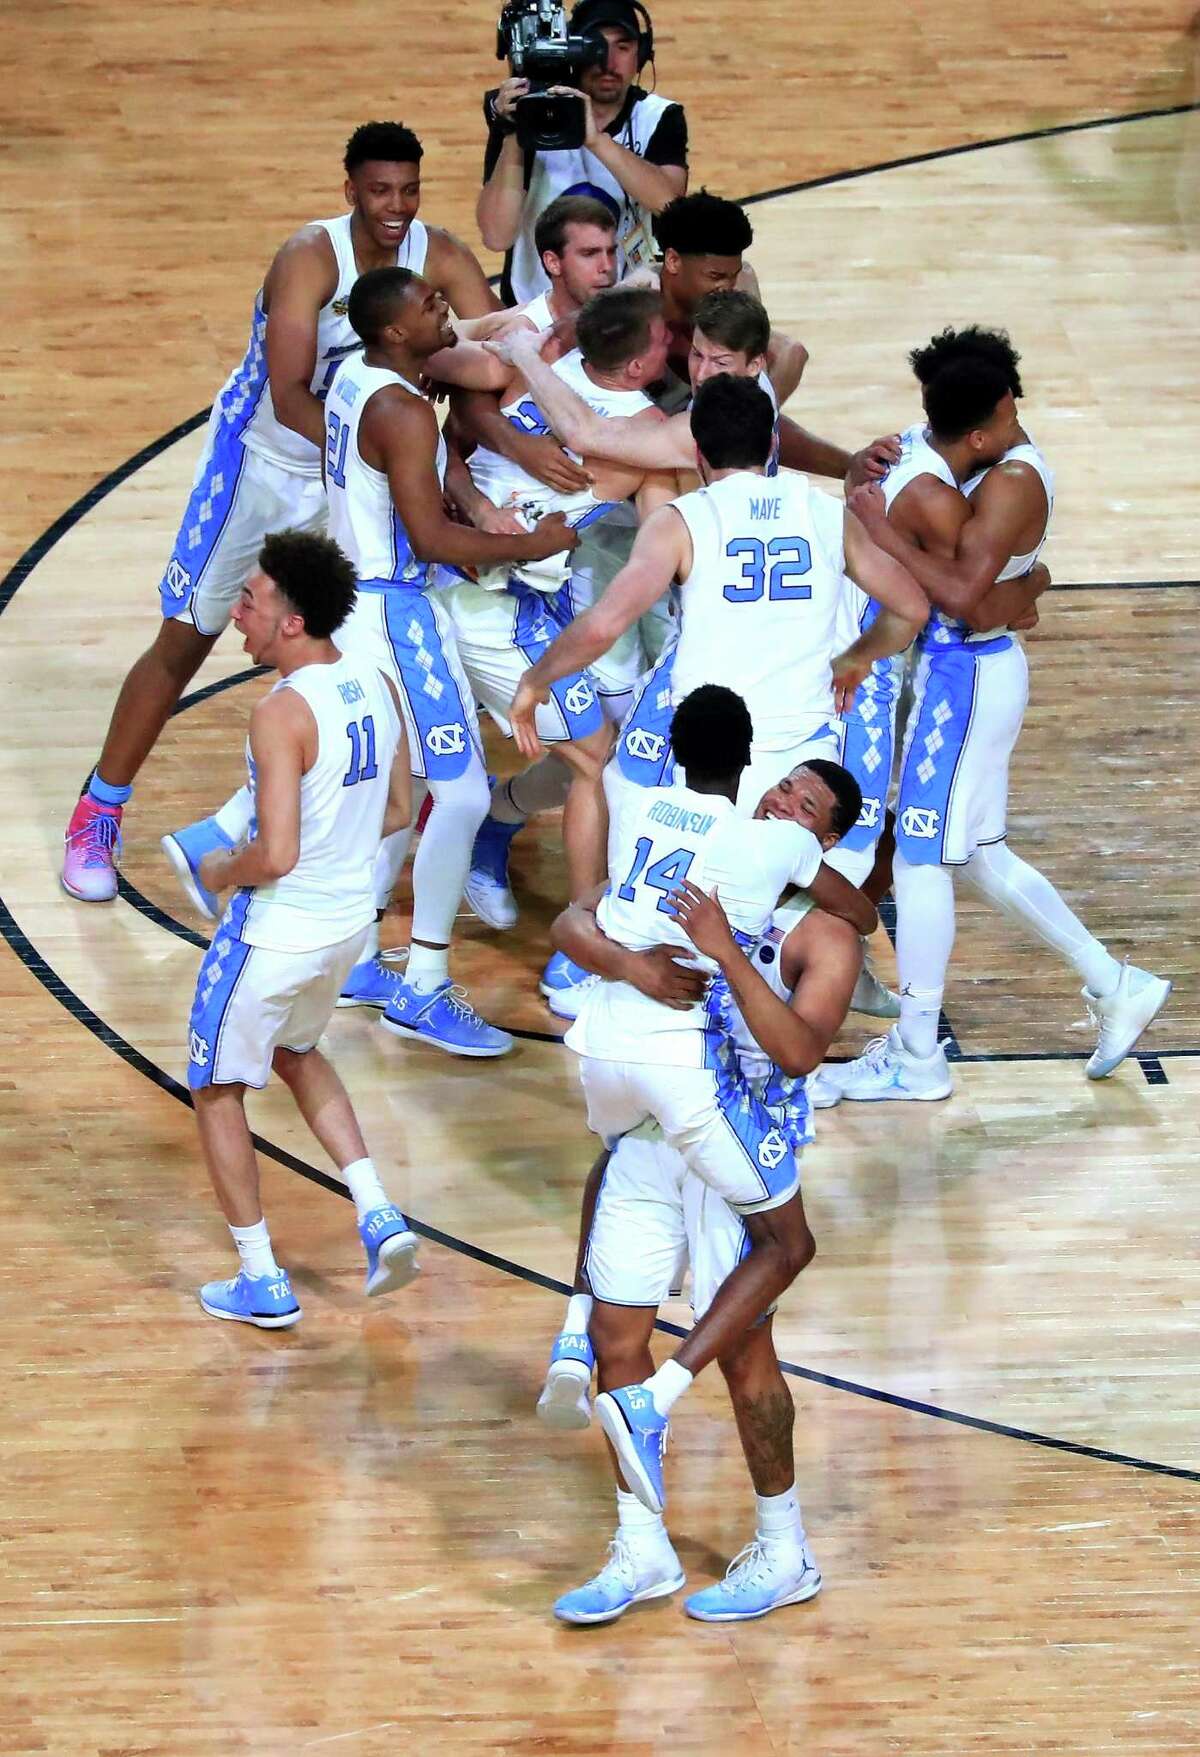 GLENDALE, AZ - APRIL 03: The North Carolina Tar Heels celebrate after defeating the Gonzaga Bulldogs during the 2017 NCAA Men's Final Four National Championship game at University of Phoenix Stadium on April 3, 2017 in Glendale, Arizona. The Tar Heels defeated the Bulldogs 71-65. (Photo by Christian Petersen/Getty Images) ORG XMIT: 686518941